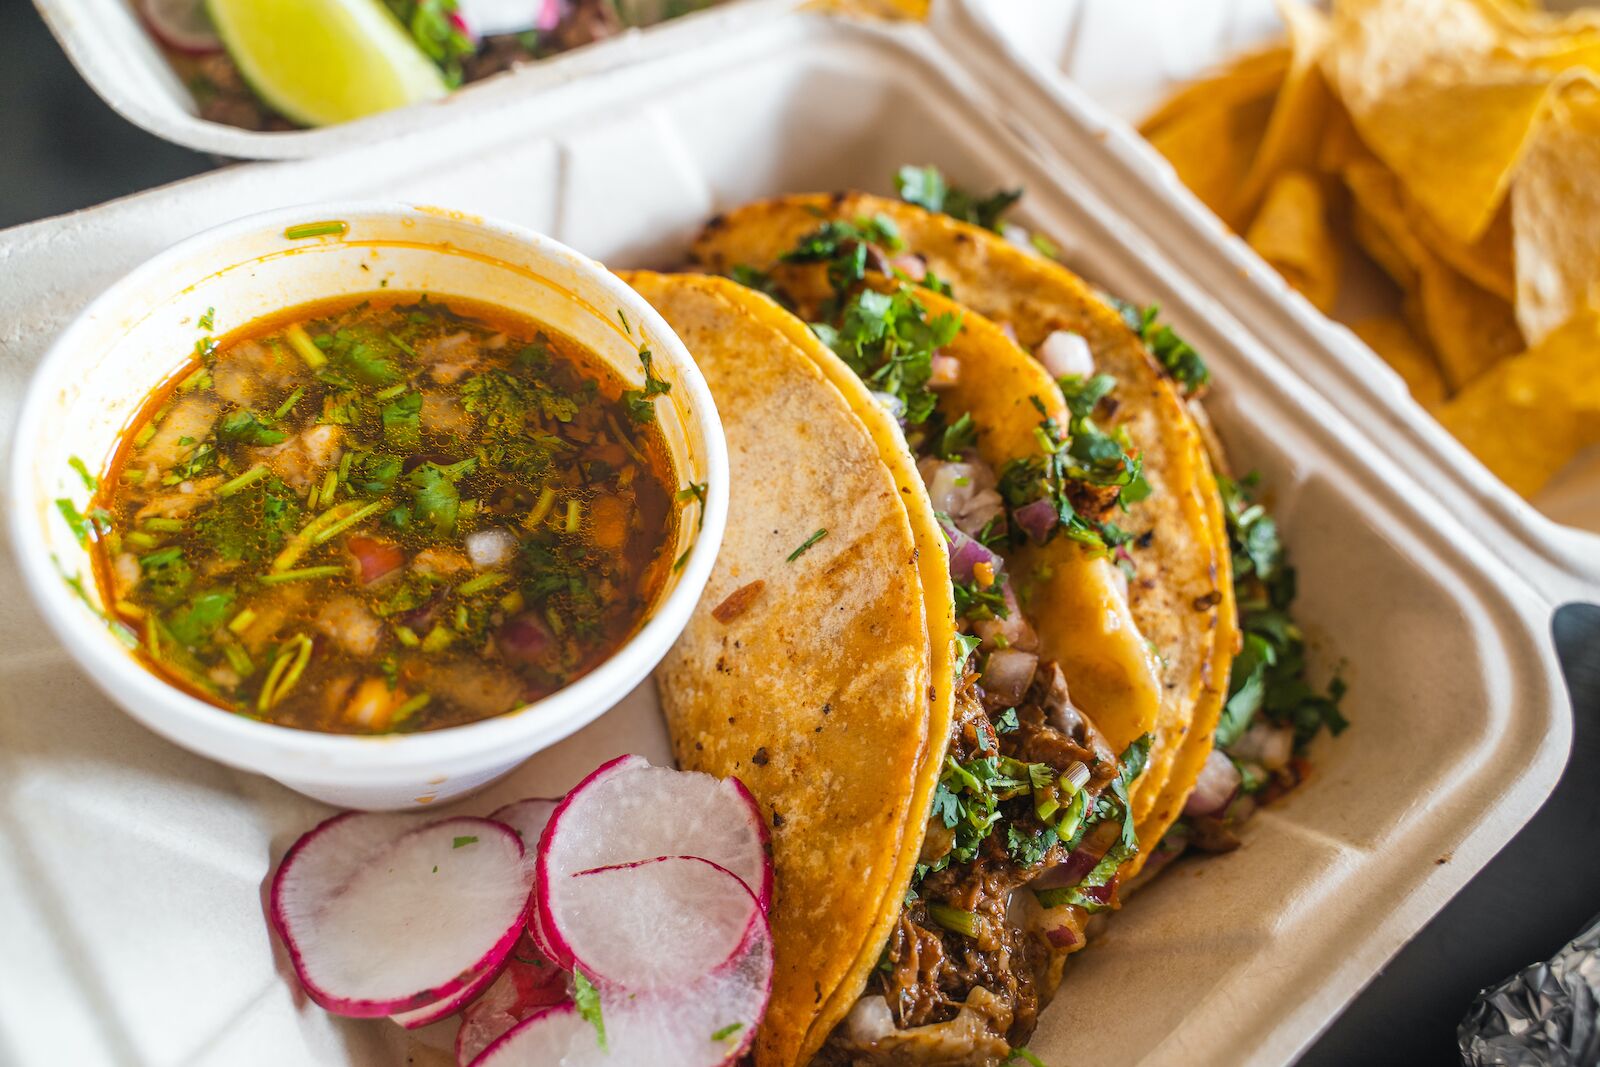 two birria tacos in a to-go container with a side of dipping sauce